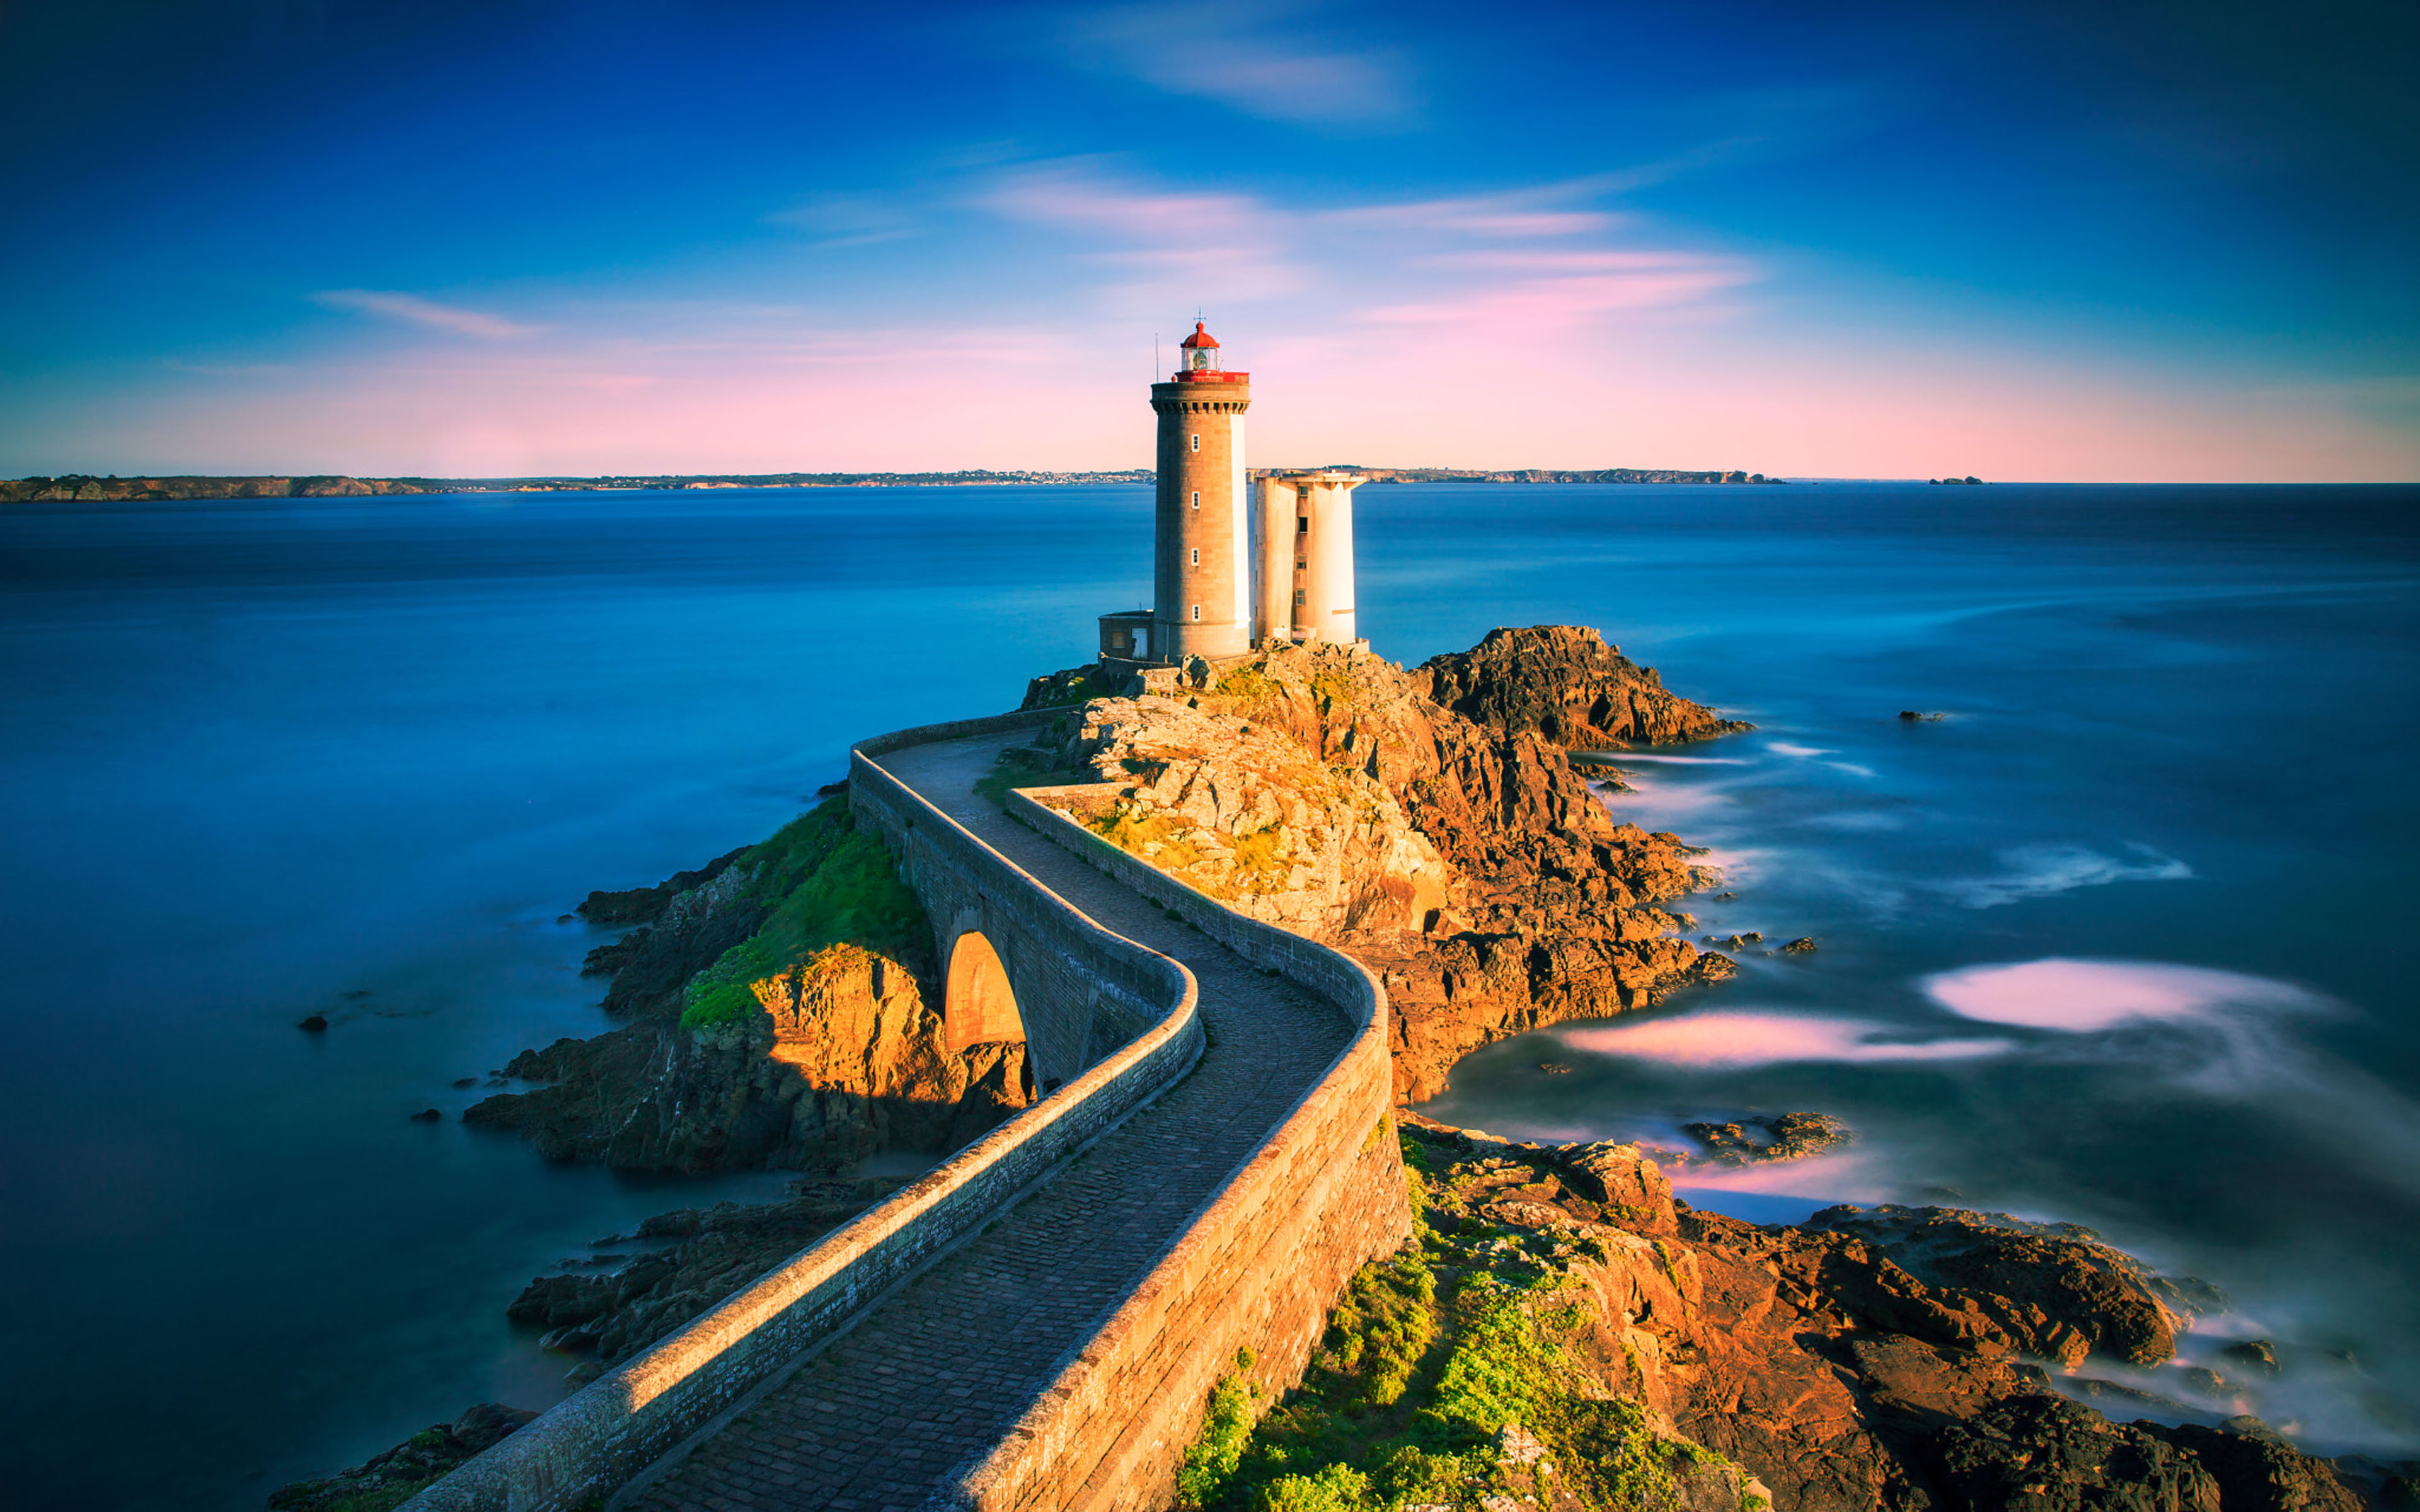 Phare Du Petit Minou Lighthouse In The Roadstead Of Brest Stands In